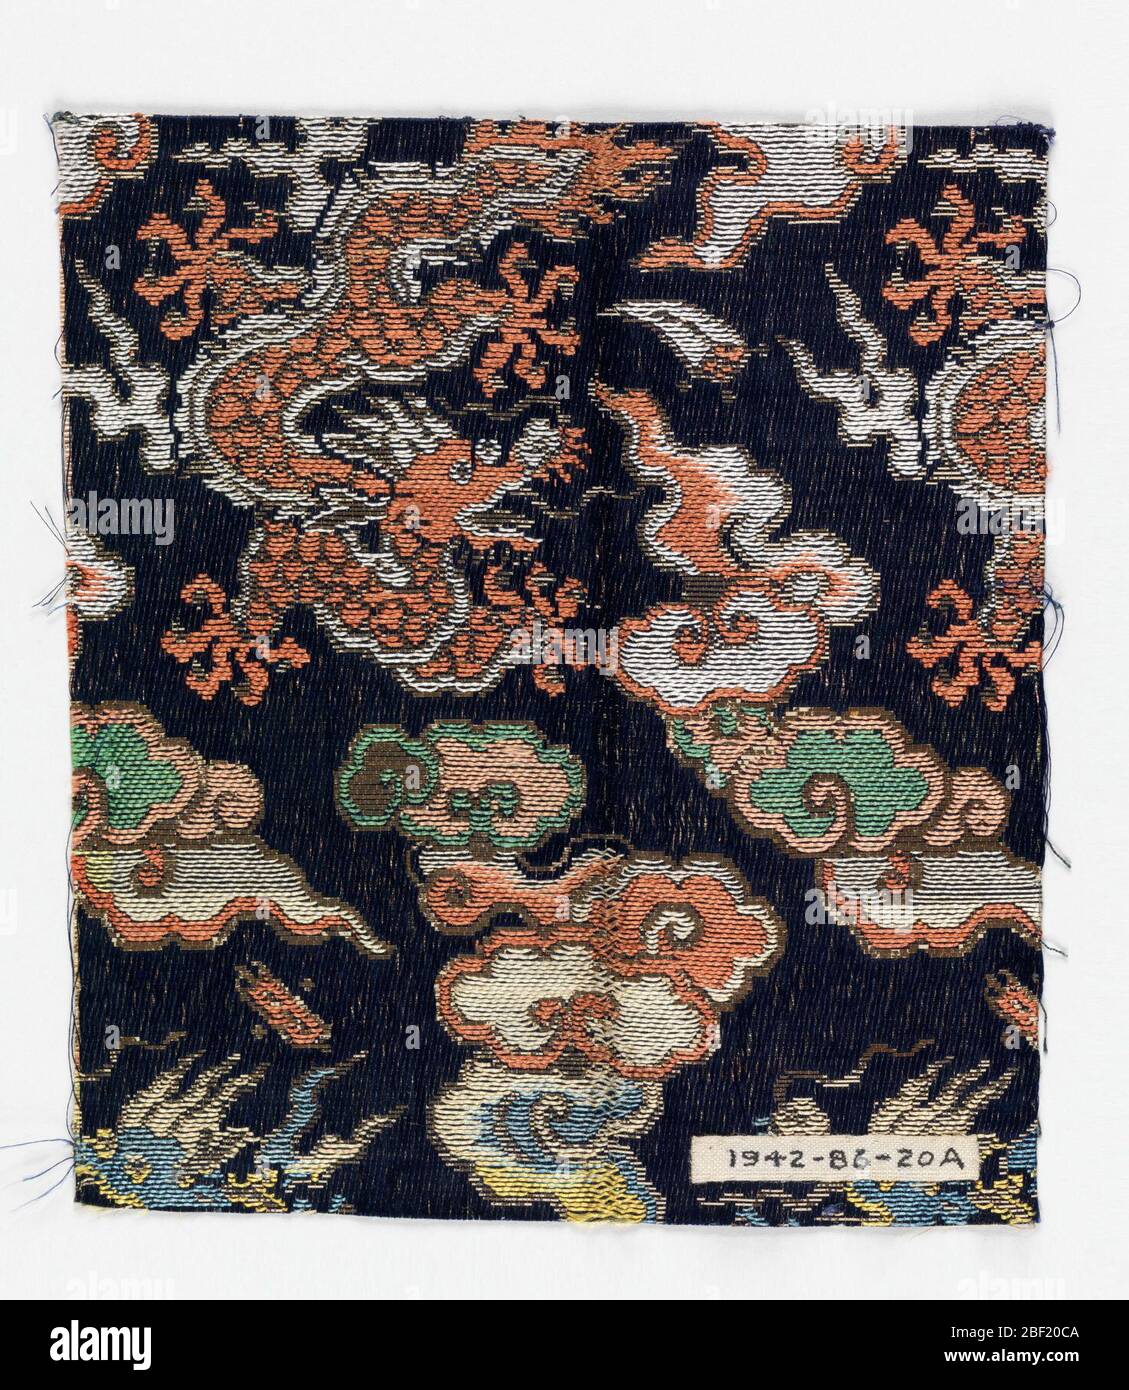 Textile fragments. Navy blue twill ground with woven supplementary weft pattern of large scale dragons and flying clouds in rust, white, yellow, green, and sky blue silk threads with metallic paper threads. Stock Photo